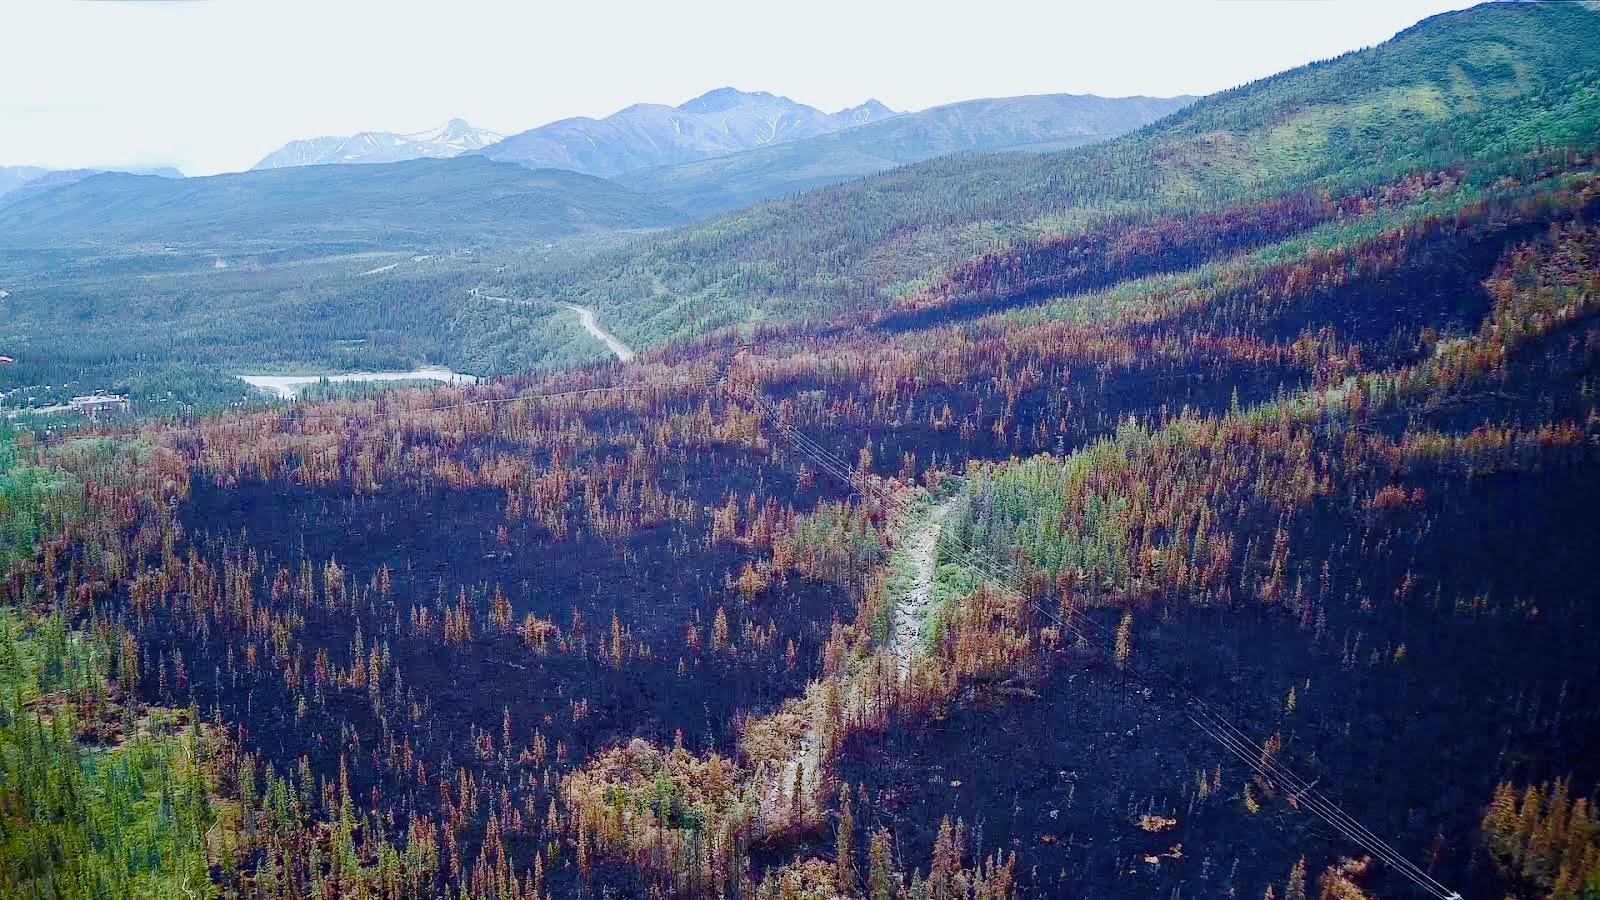 An aerial view of the Riley Fire at Denali National Park and Preserve showing the burned area, part of a river and mountains in the distance.